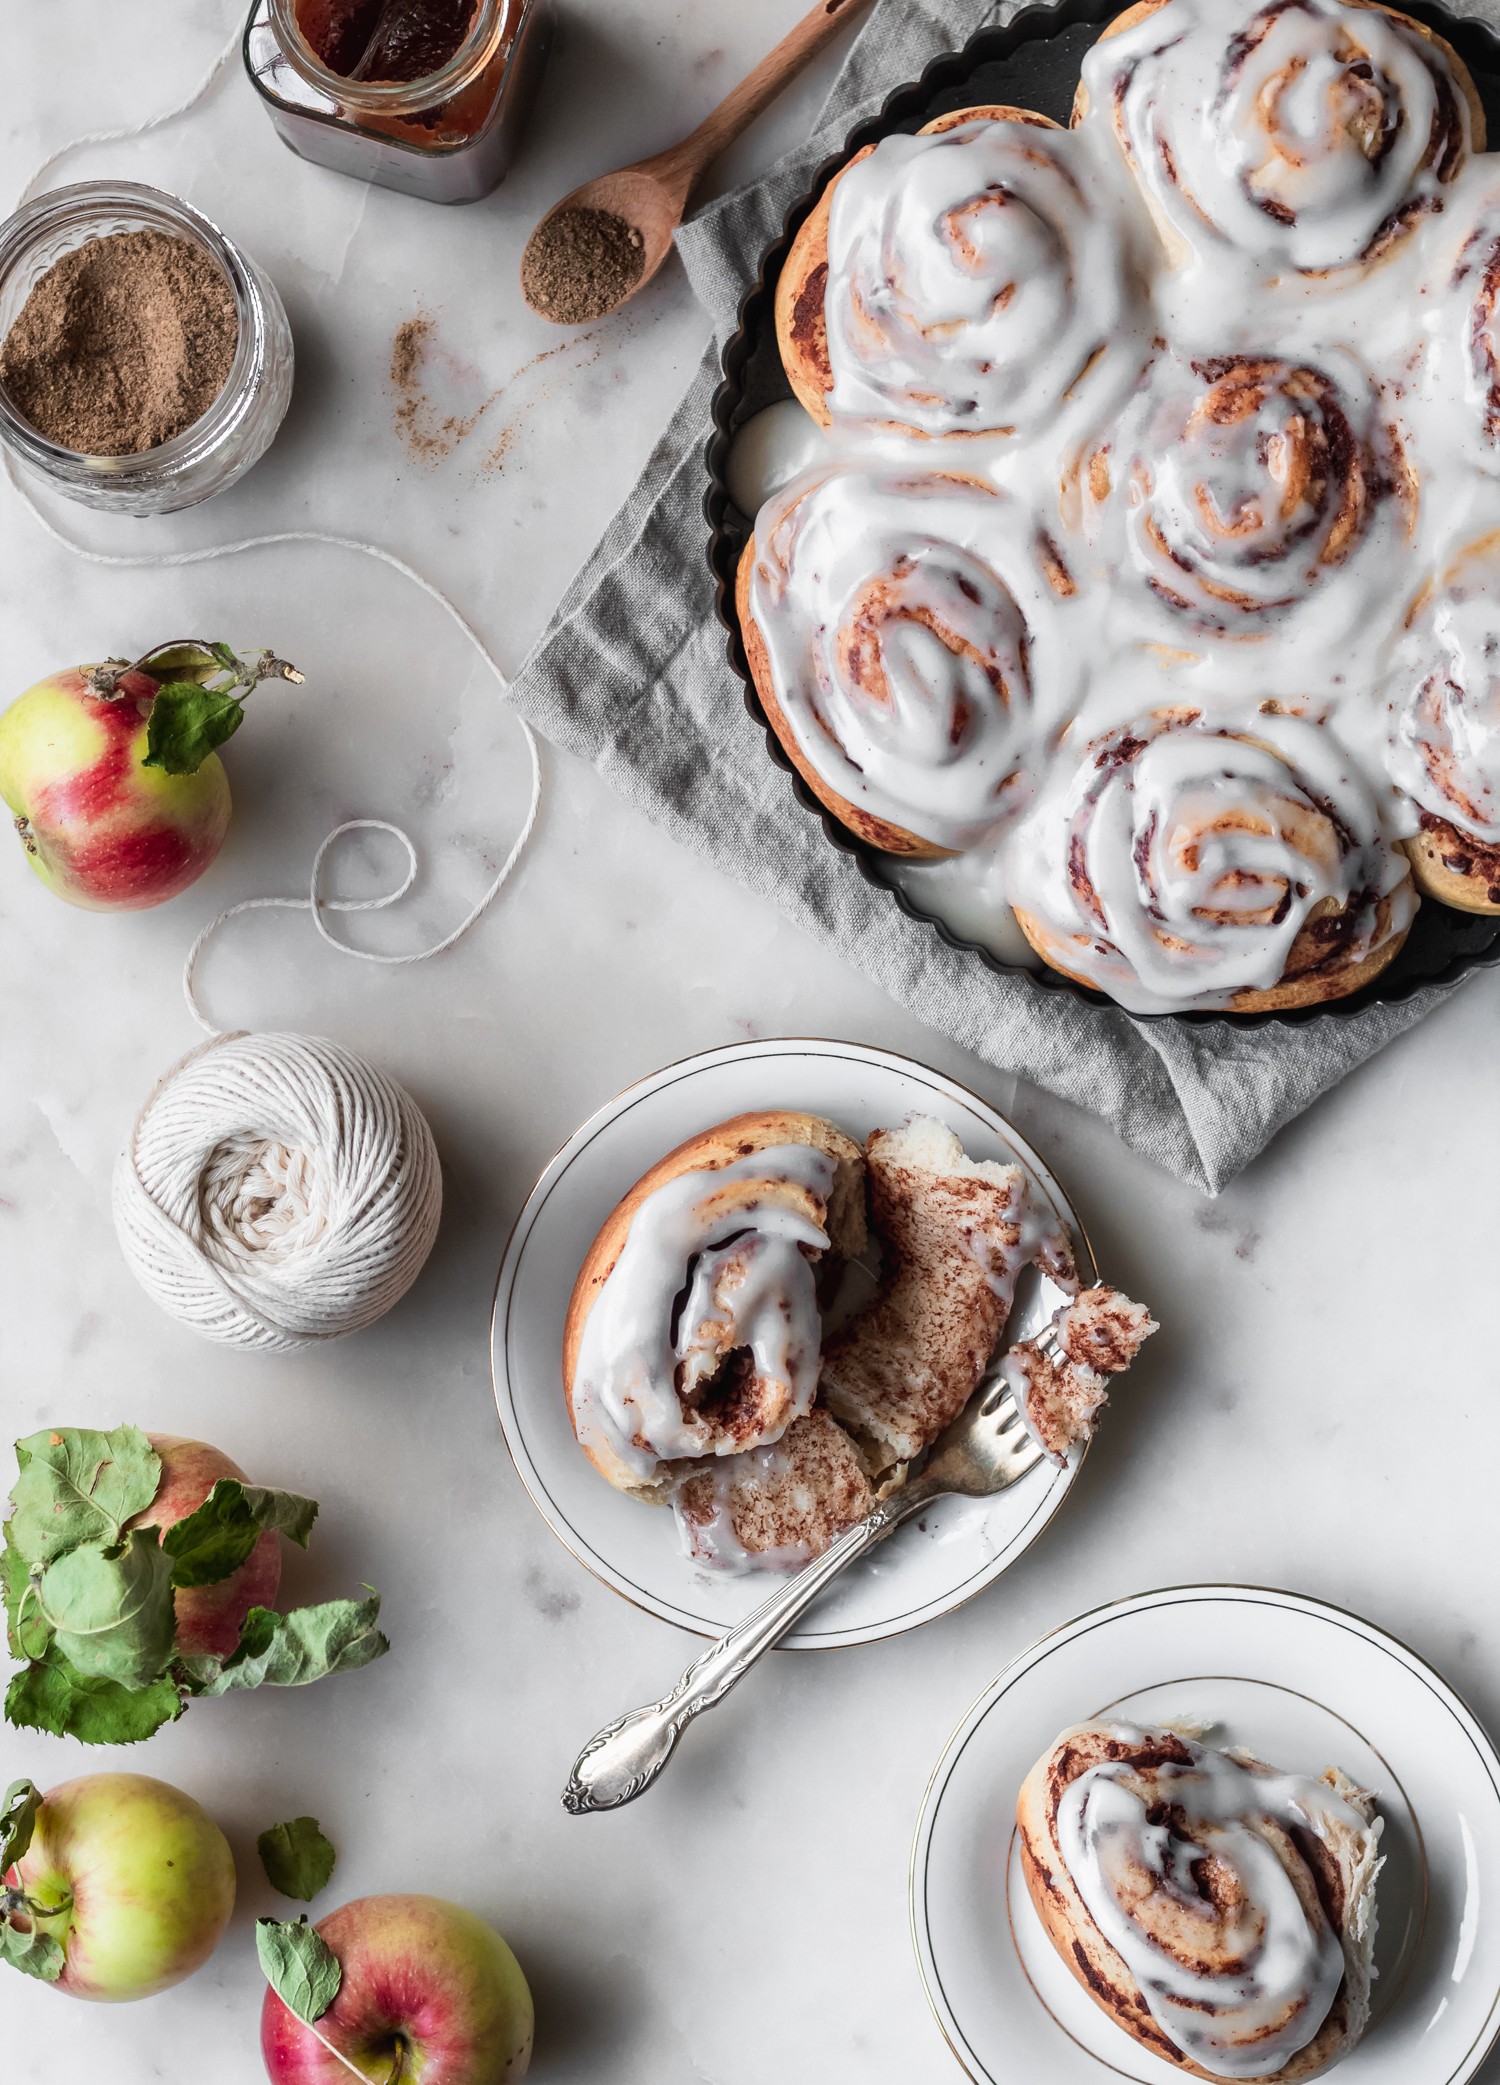 An overhead image of an apple butter cinnamon roll on a white plate with a fork tearing it apart. The plate is on a marble counter next to a larger tray of apple butter cinnamon rolls, apples, and twine.